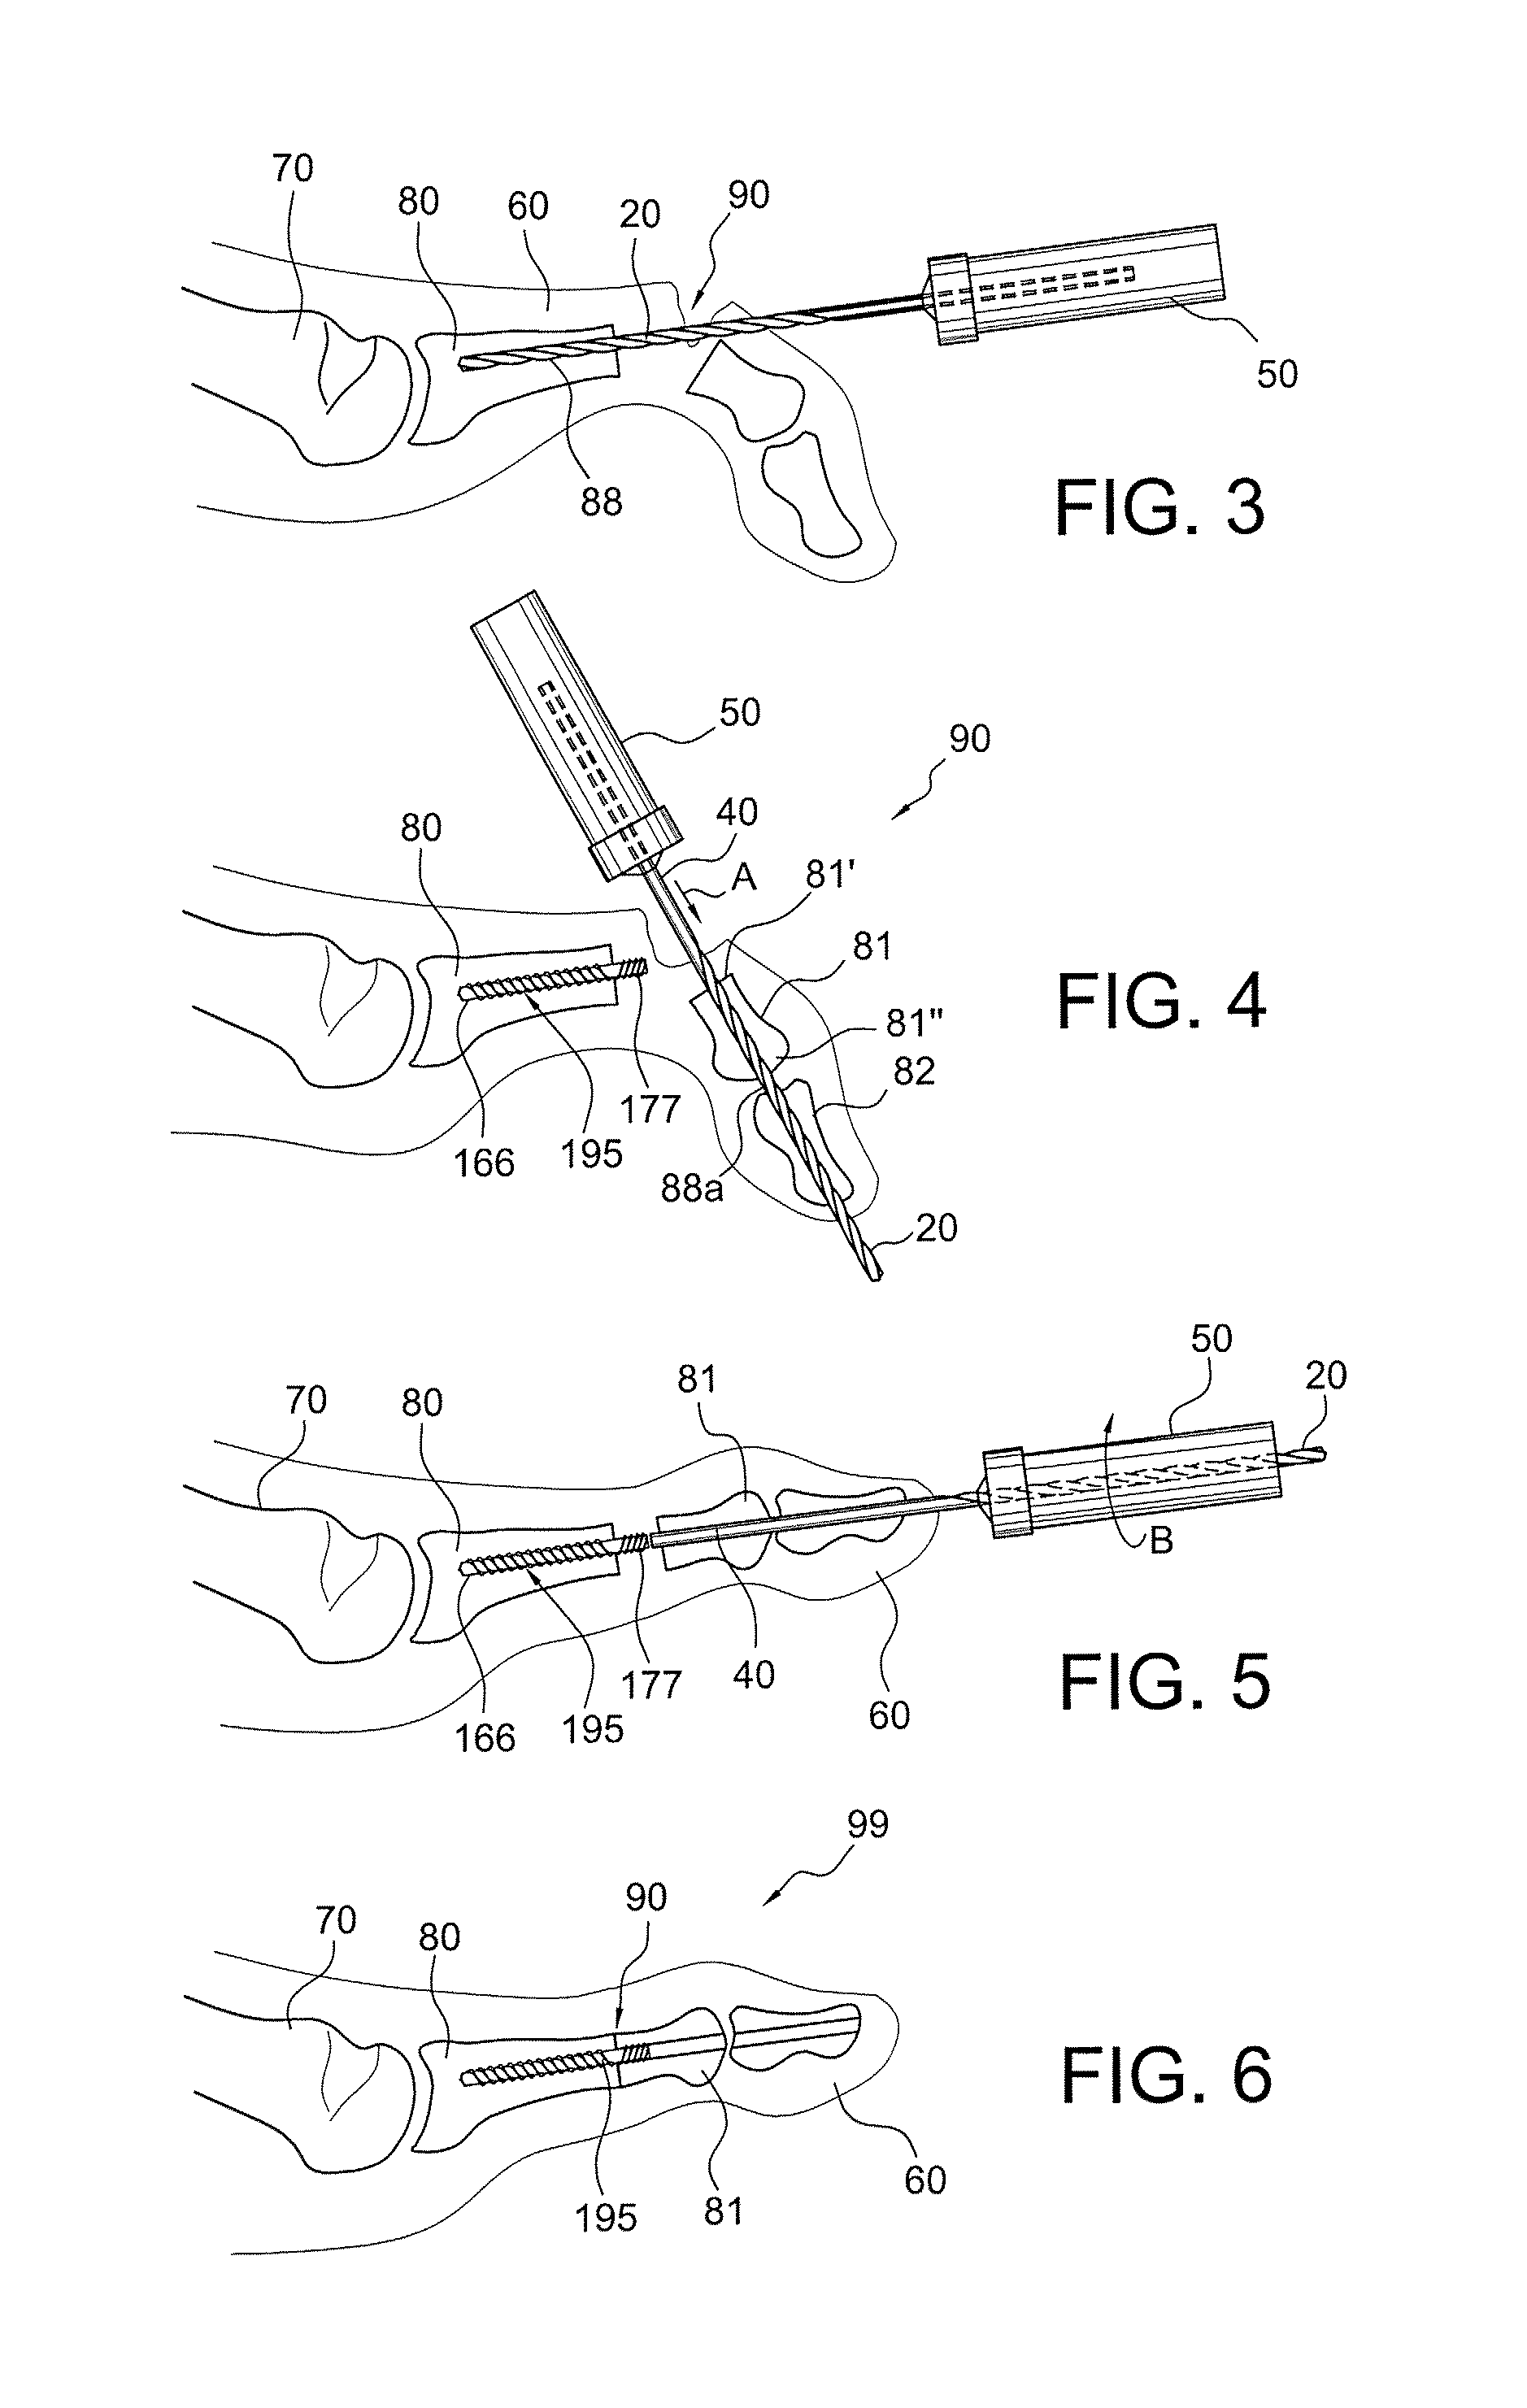 Drill/driver hybrid instrument for interphalangeal fusion